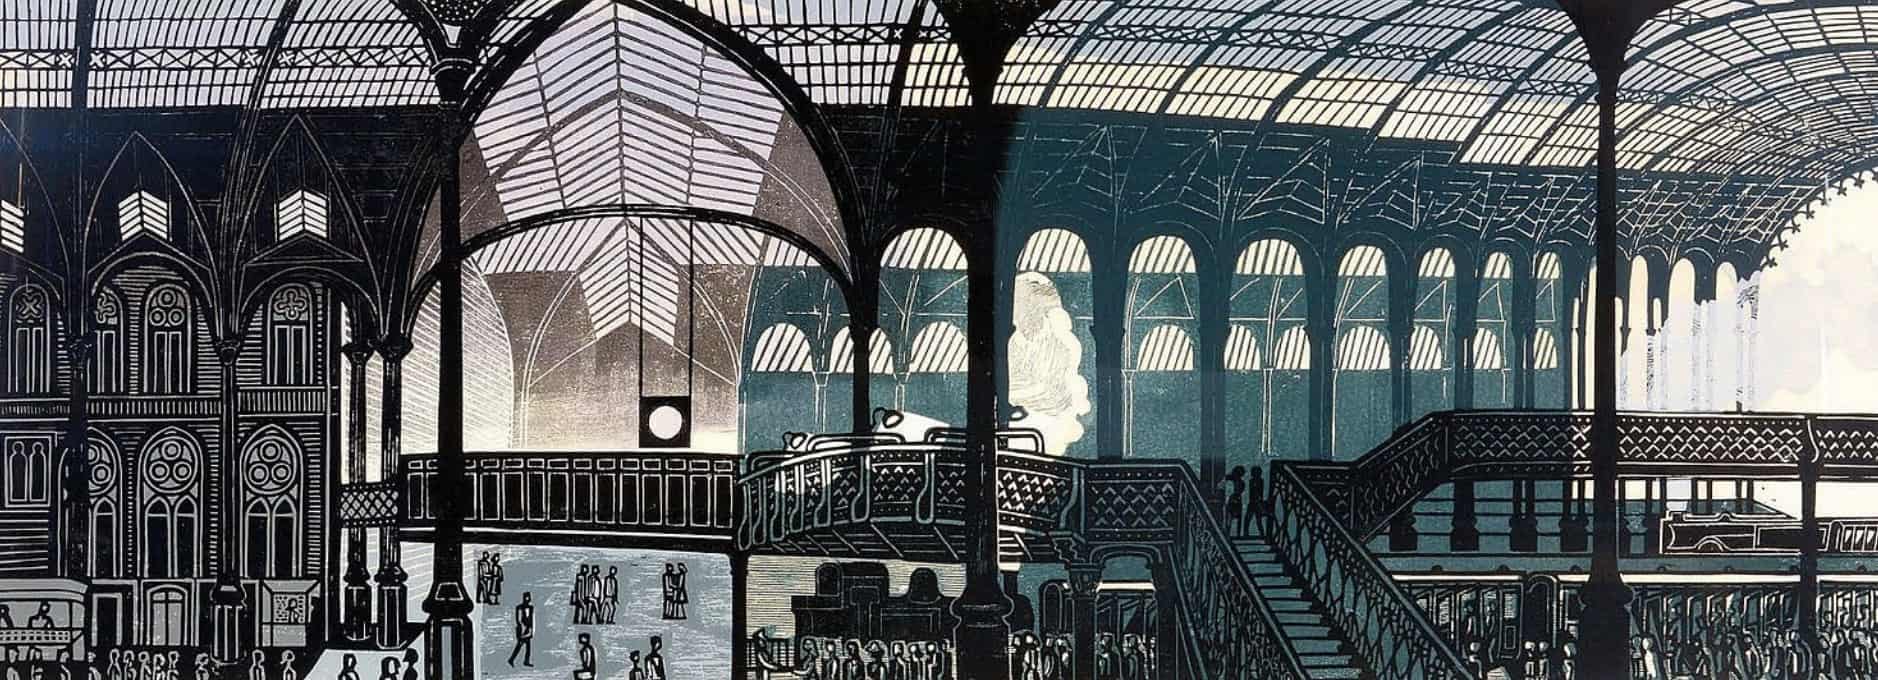 Liverpool Street Station by Edward Bawden, colour lithograph, 1961